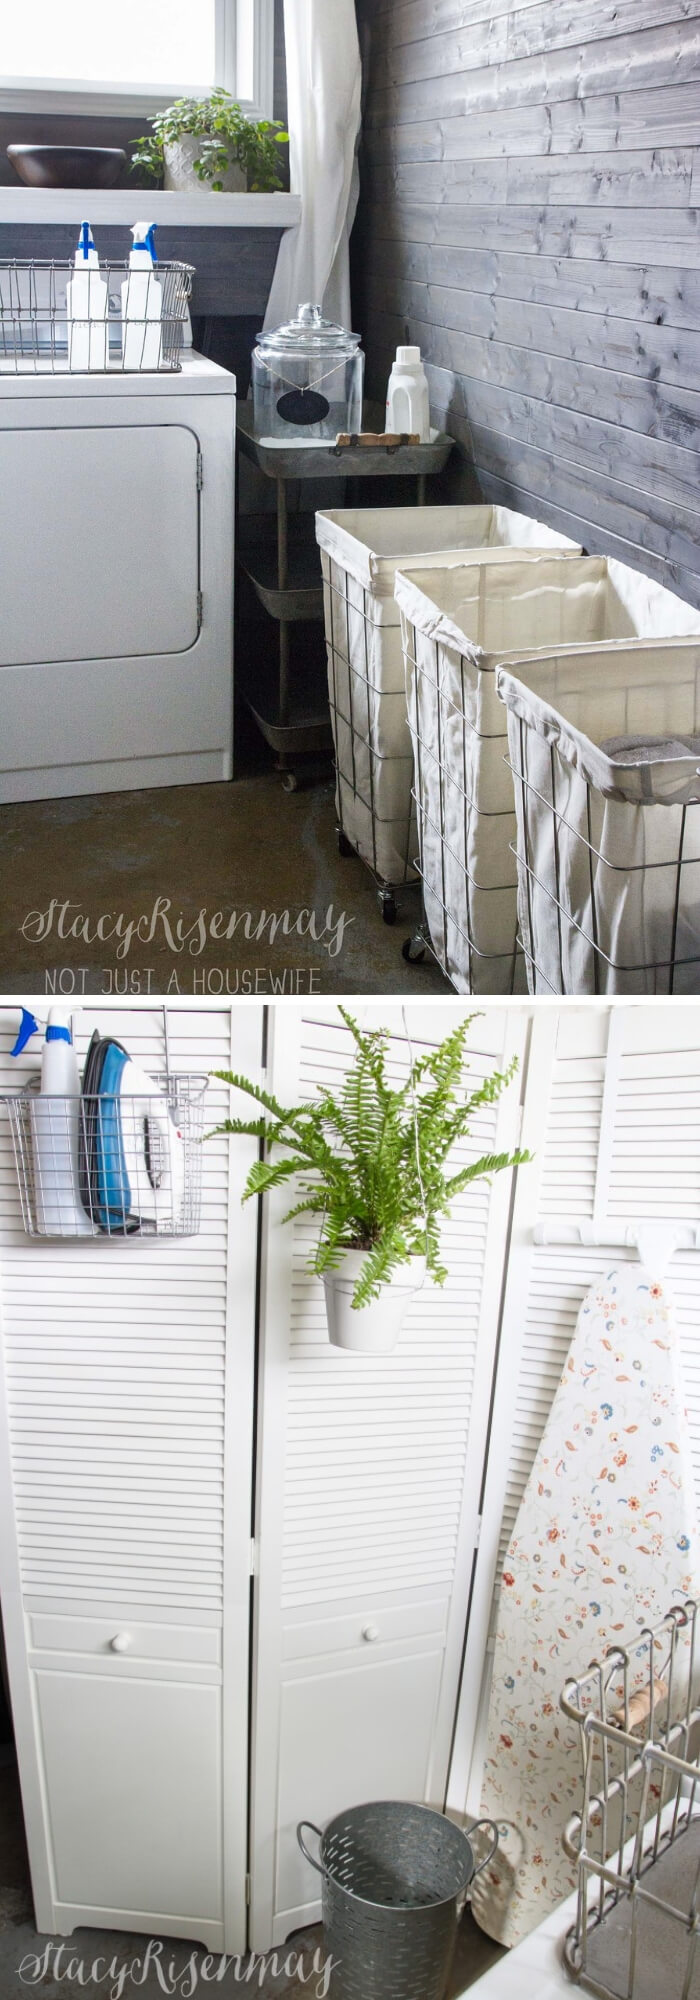 DIY Farmhouse Laundry Room Ideas: Solving problem in laundry room with rolling laundry cart